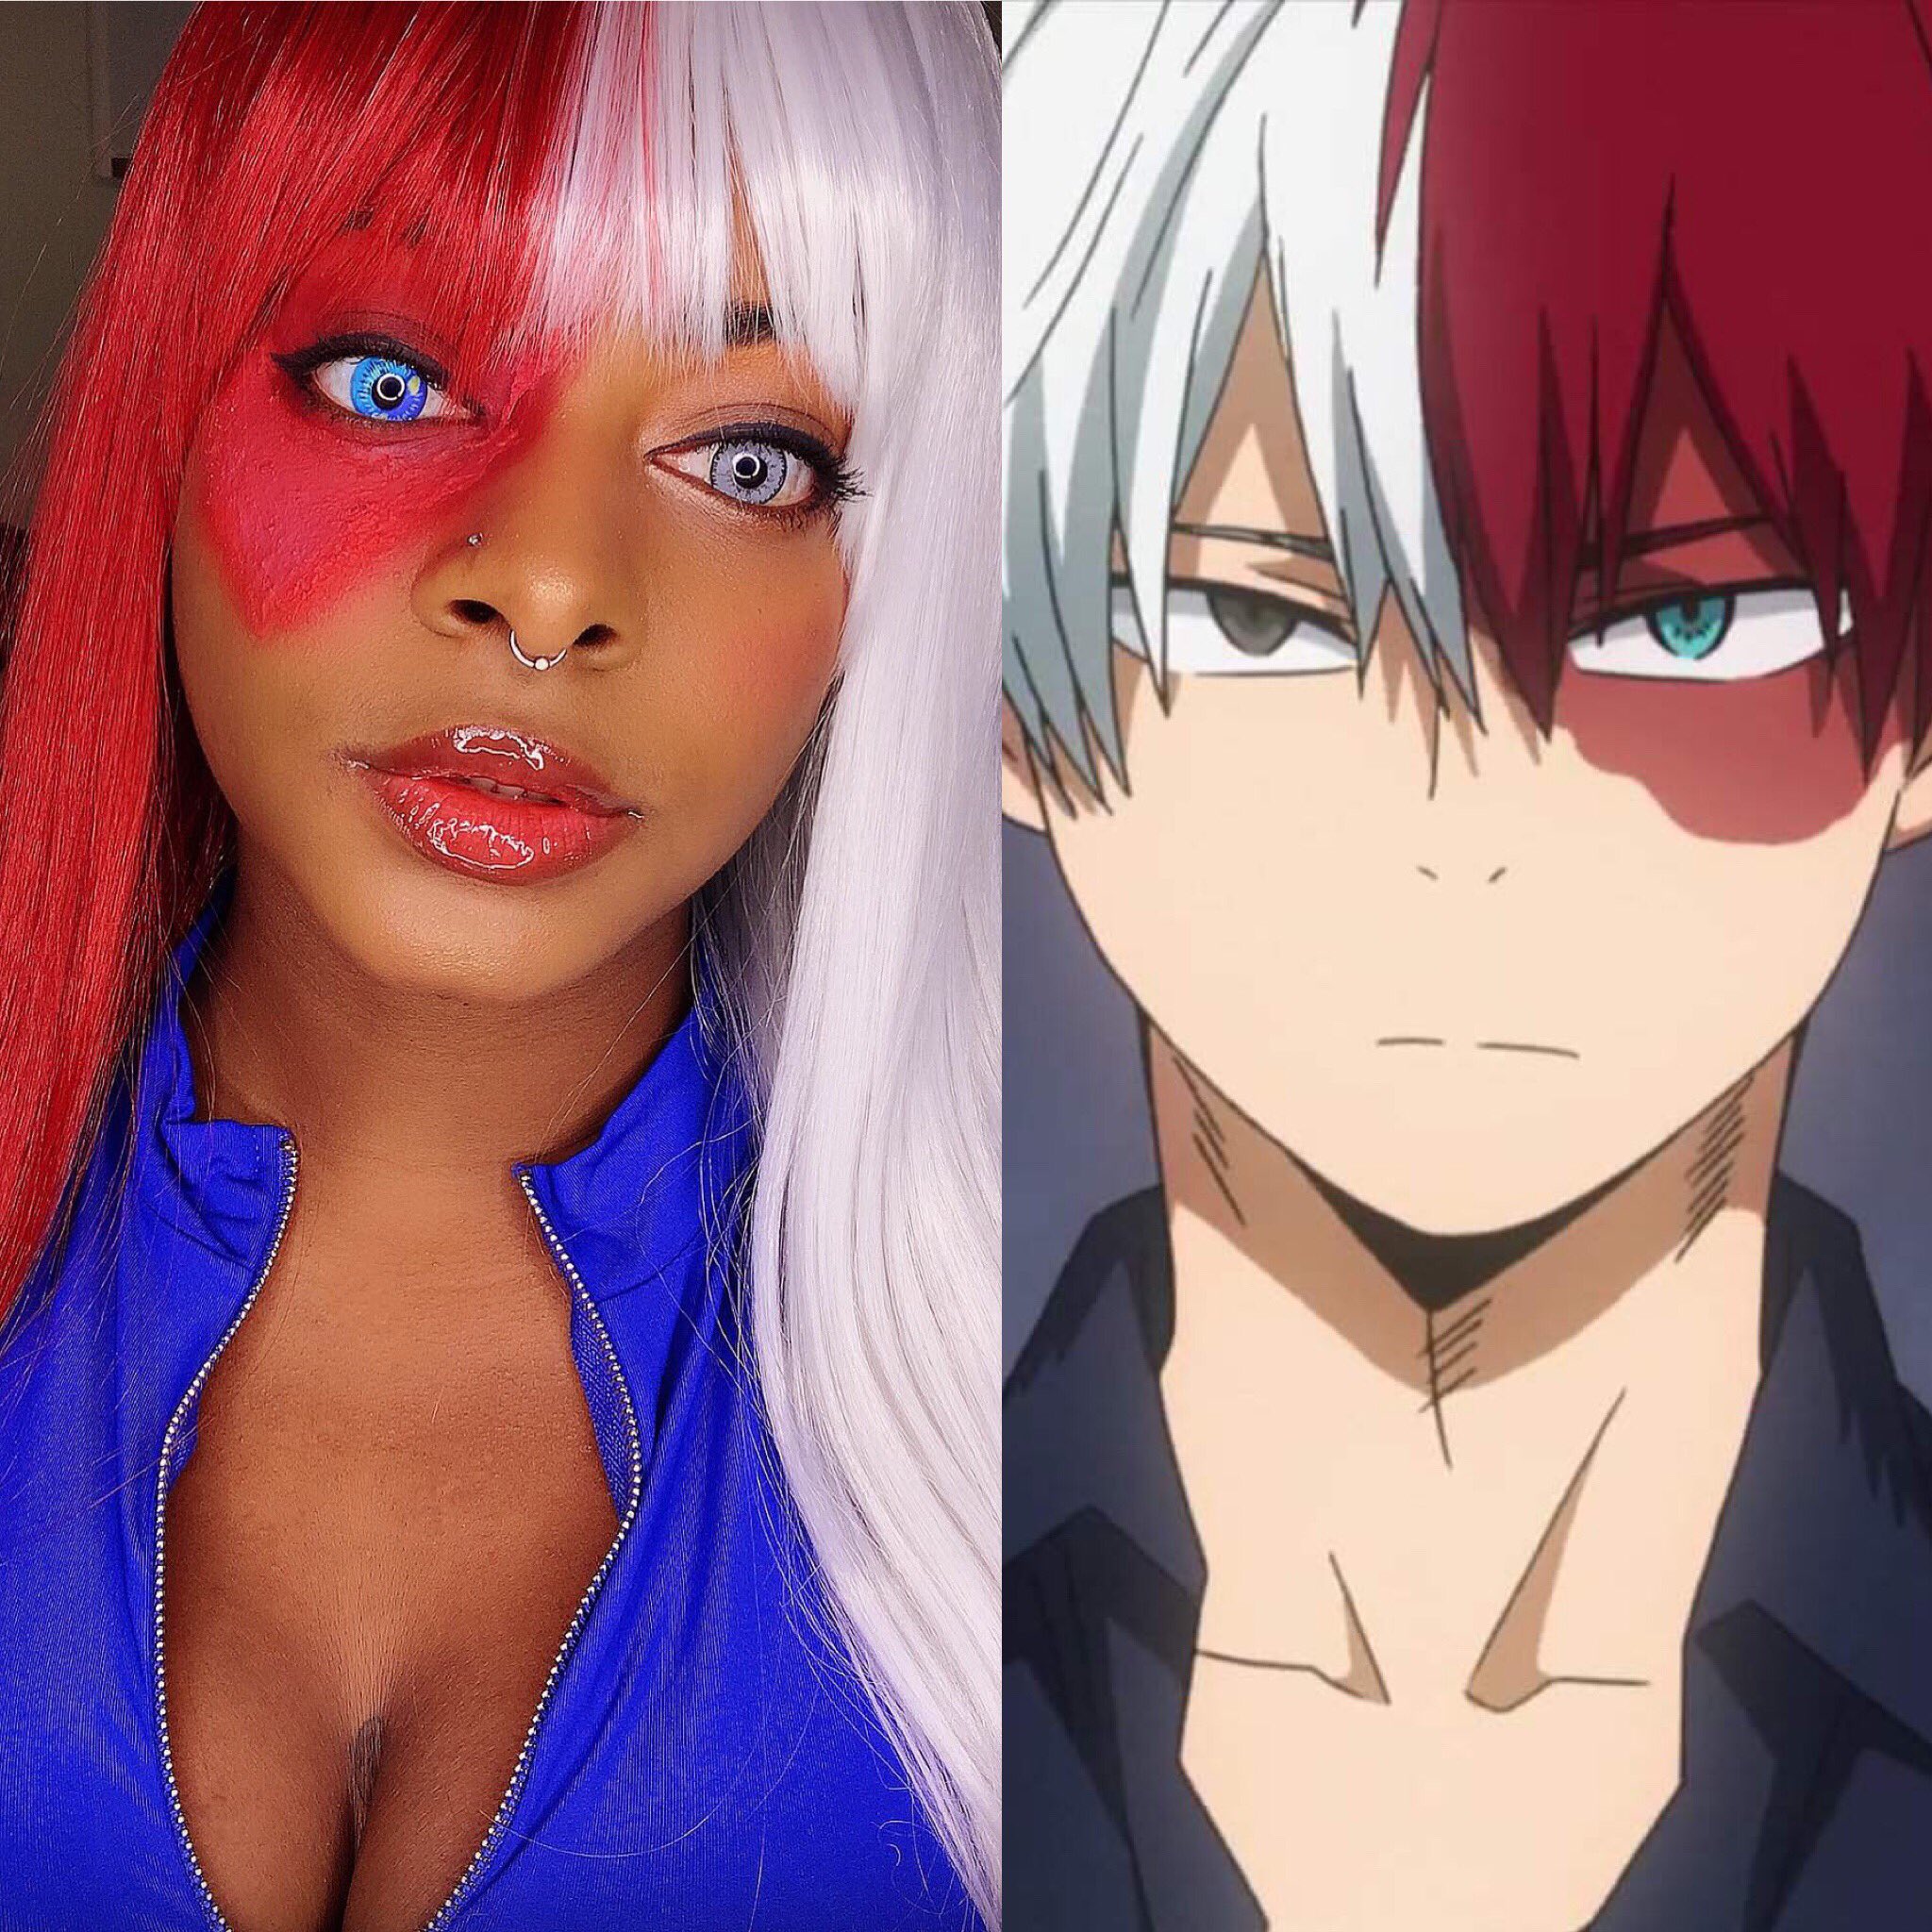 A side-by-side comparison of DeLa Doll's Todoroki cosplay next to the actual character from My Hero Academia